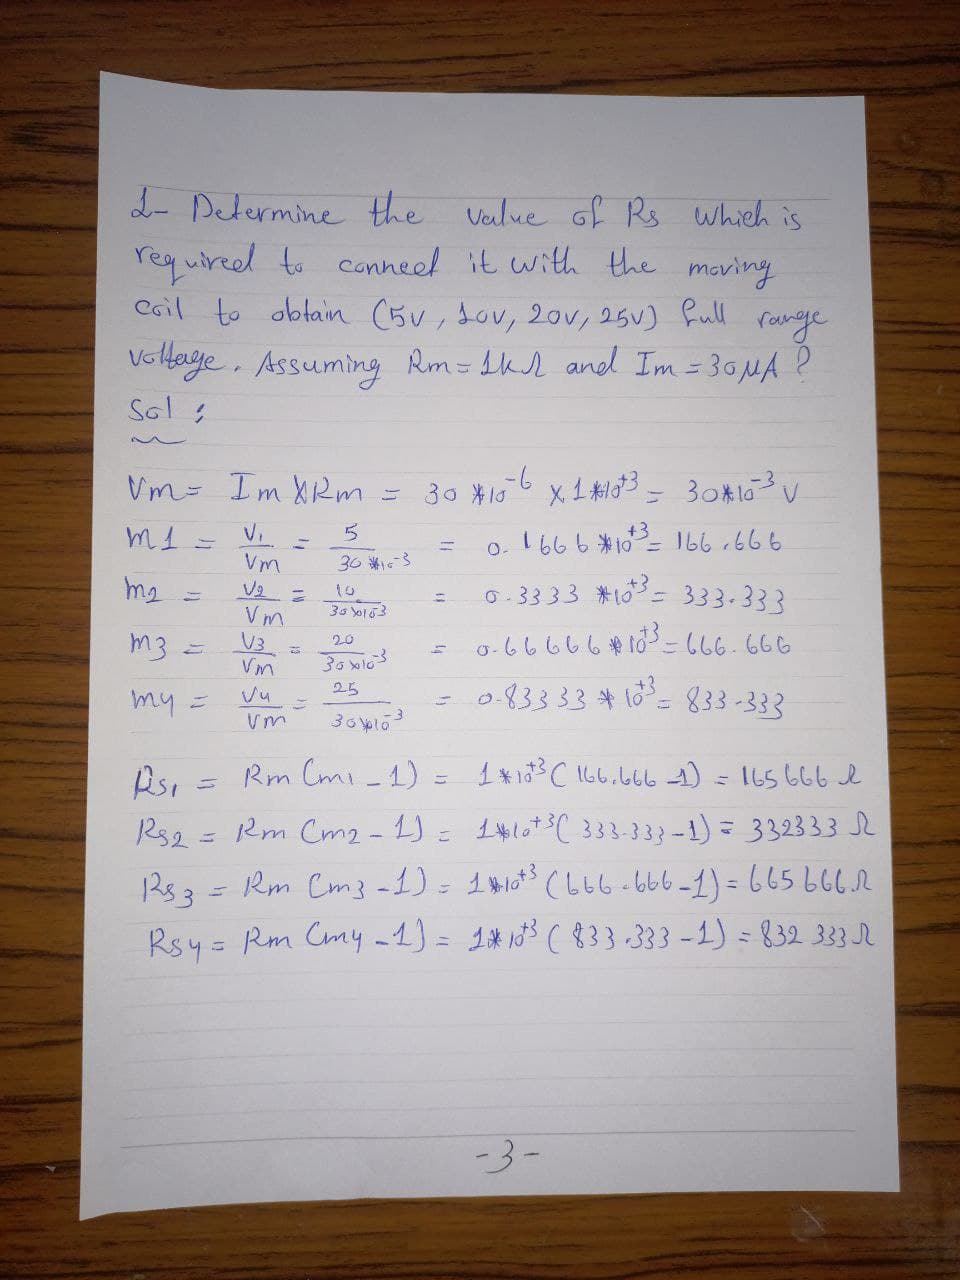 2- Determine the veilue Gf Rs which is
requireed to canneel it with the maving
Cail to obtain (5v, Jov, 20v, 25V) full
ronge
VoHaye. Assuming Rm=tkd and Im = 30MA ?
Sol s
Vm- Im XRm
30 *10
V.
+3
o. 1666 *10= 166 r666
13D
Vm
36 3
0.3333 *10= 333-333
to
Vm
V3
m3 =
o-66666#103 -666.666
20
083333#16= 833 -333
25
my =
Rm Cmi_1)
165 666 e
110*3( 333-333-1) = 332333
Rs2 = Rm Cm2 - 1)
Rs3=Rm Cm3 -1) = 1#103 (b66-666-1)=665666r
Rsy = Rm Cmy -1) = 1*13 ( 833 -333 -1) = 832 333 R
-3-
